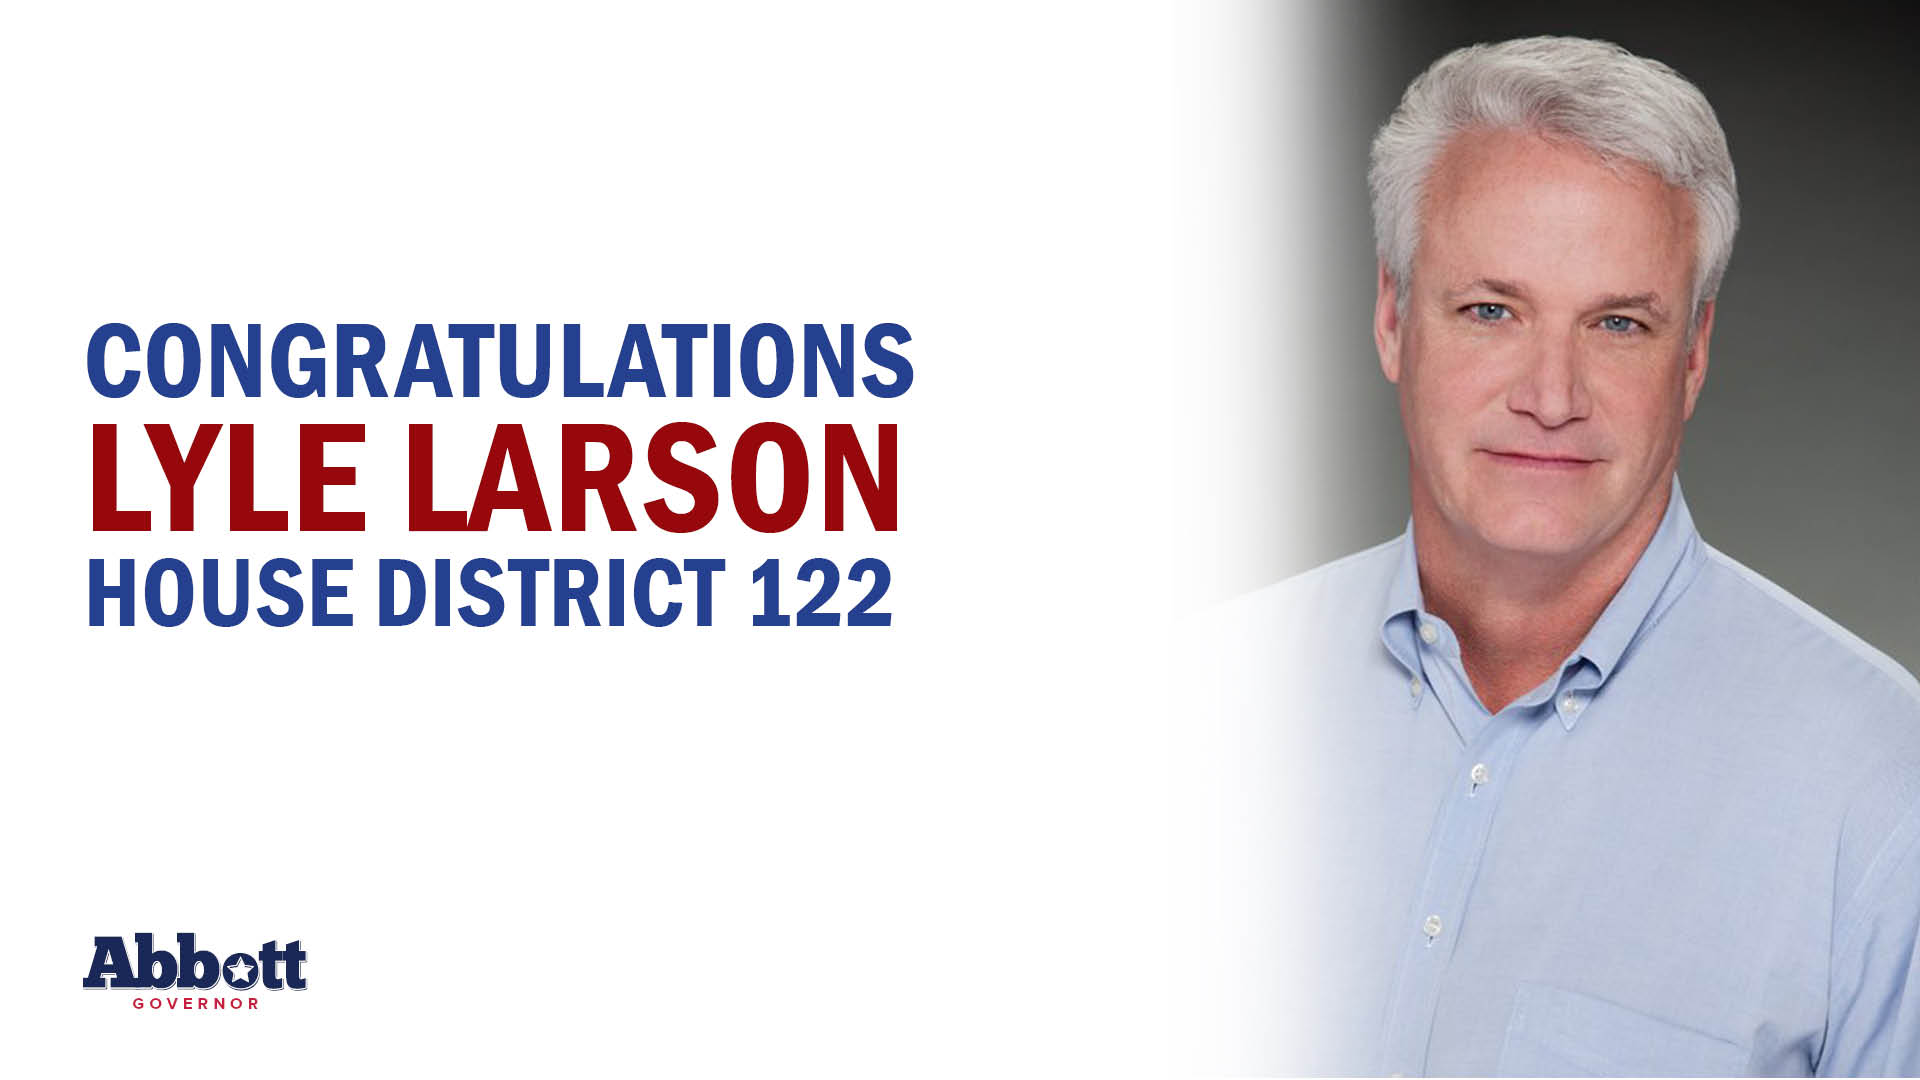 Governor Abbott Congratulates Lyle Larson On Hard-Earned Victory In House District 122